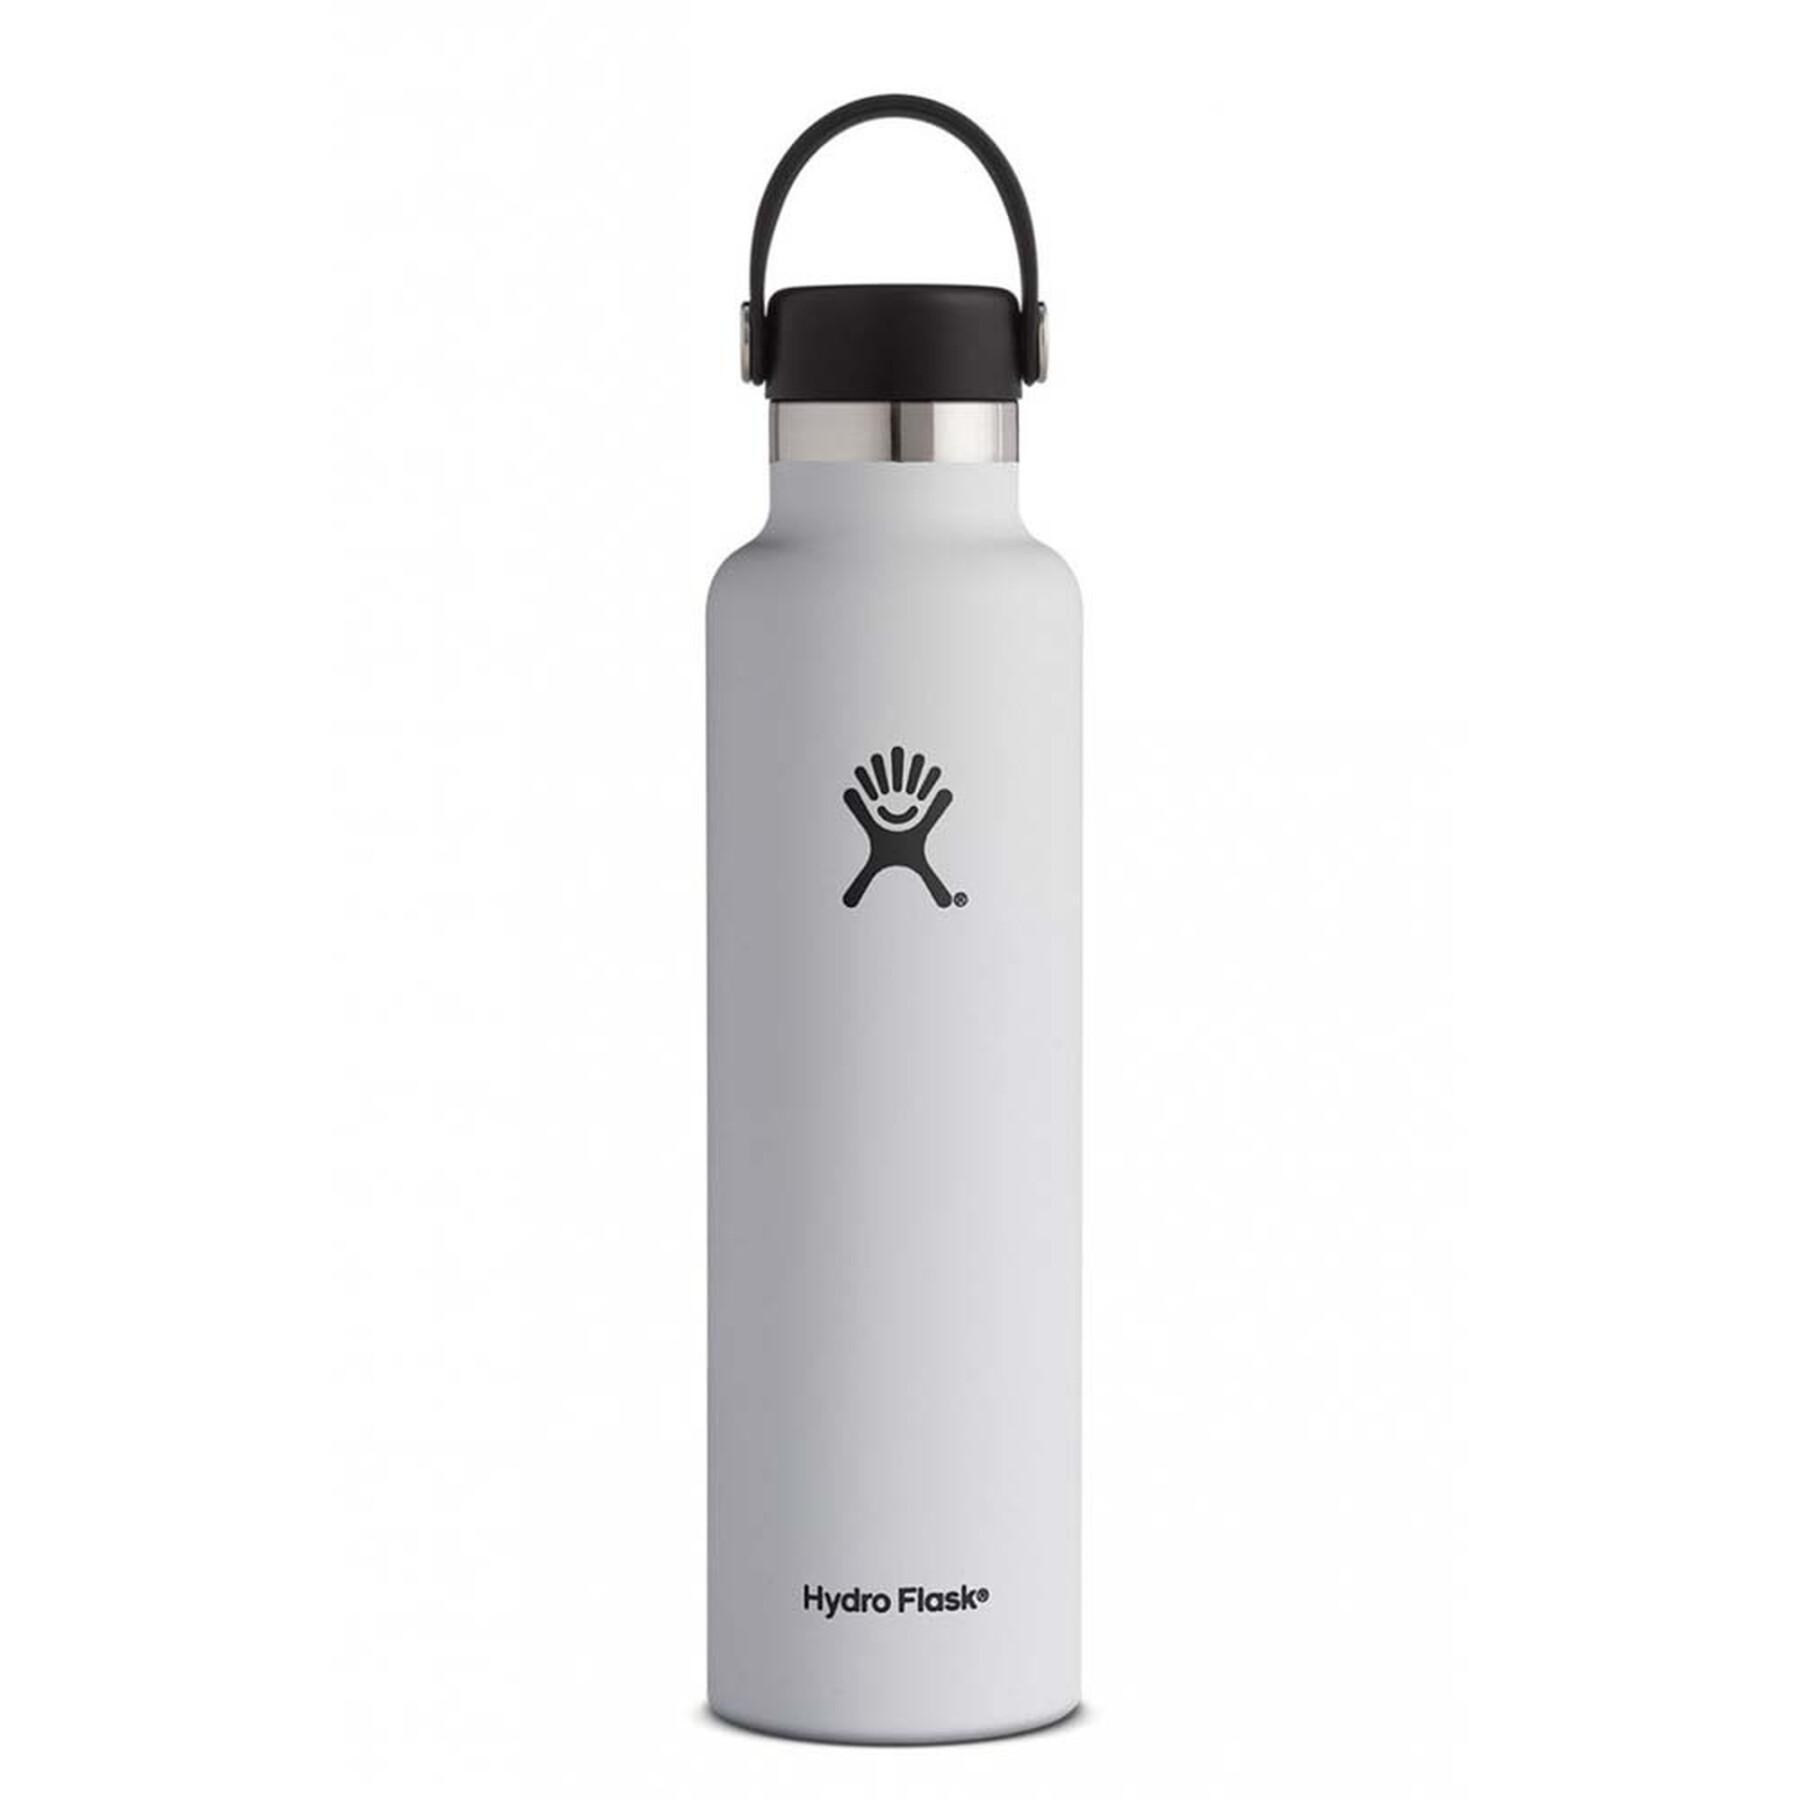 Thermos standard Hydro Flask with standard mouth flew cap 24 oz